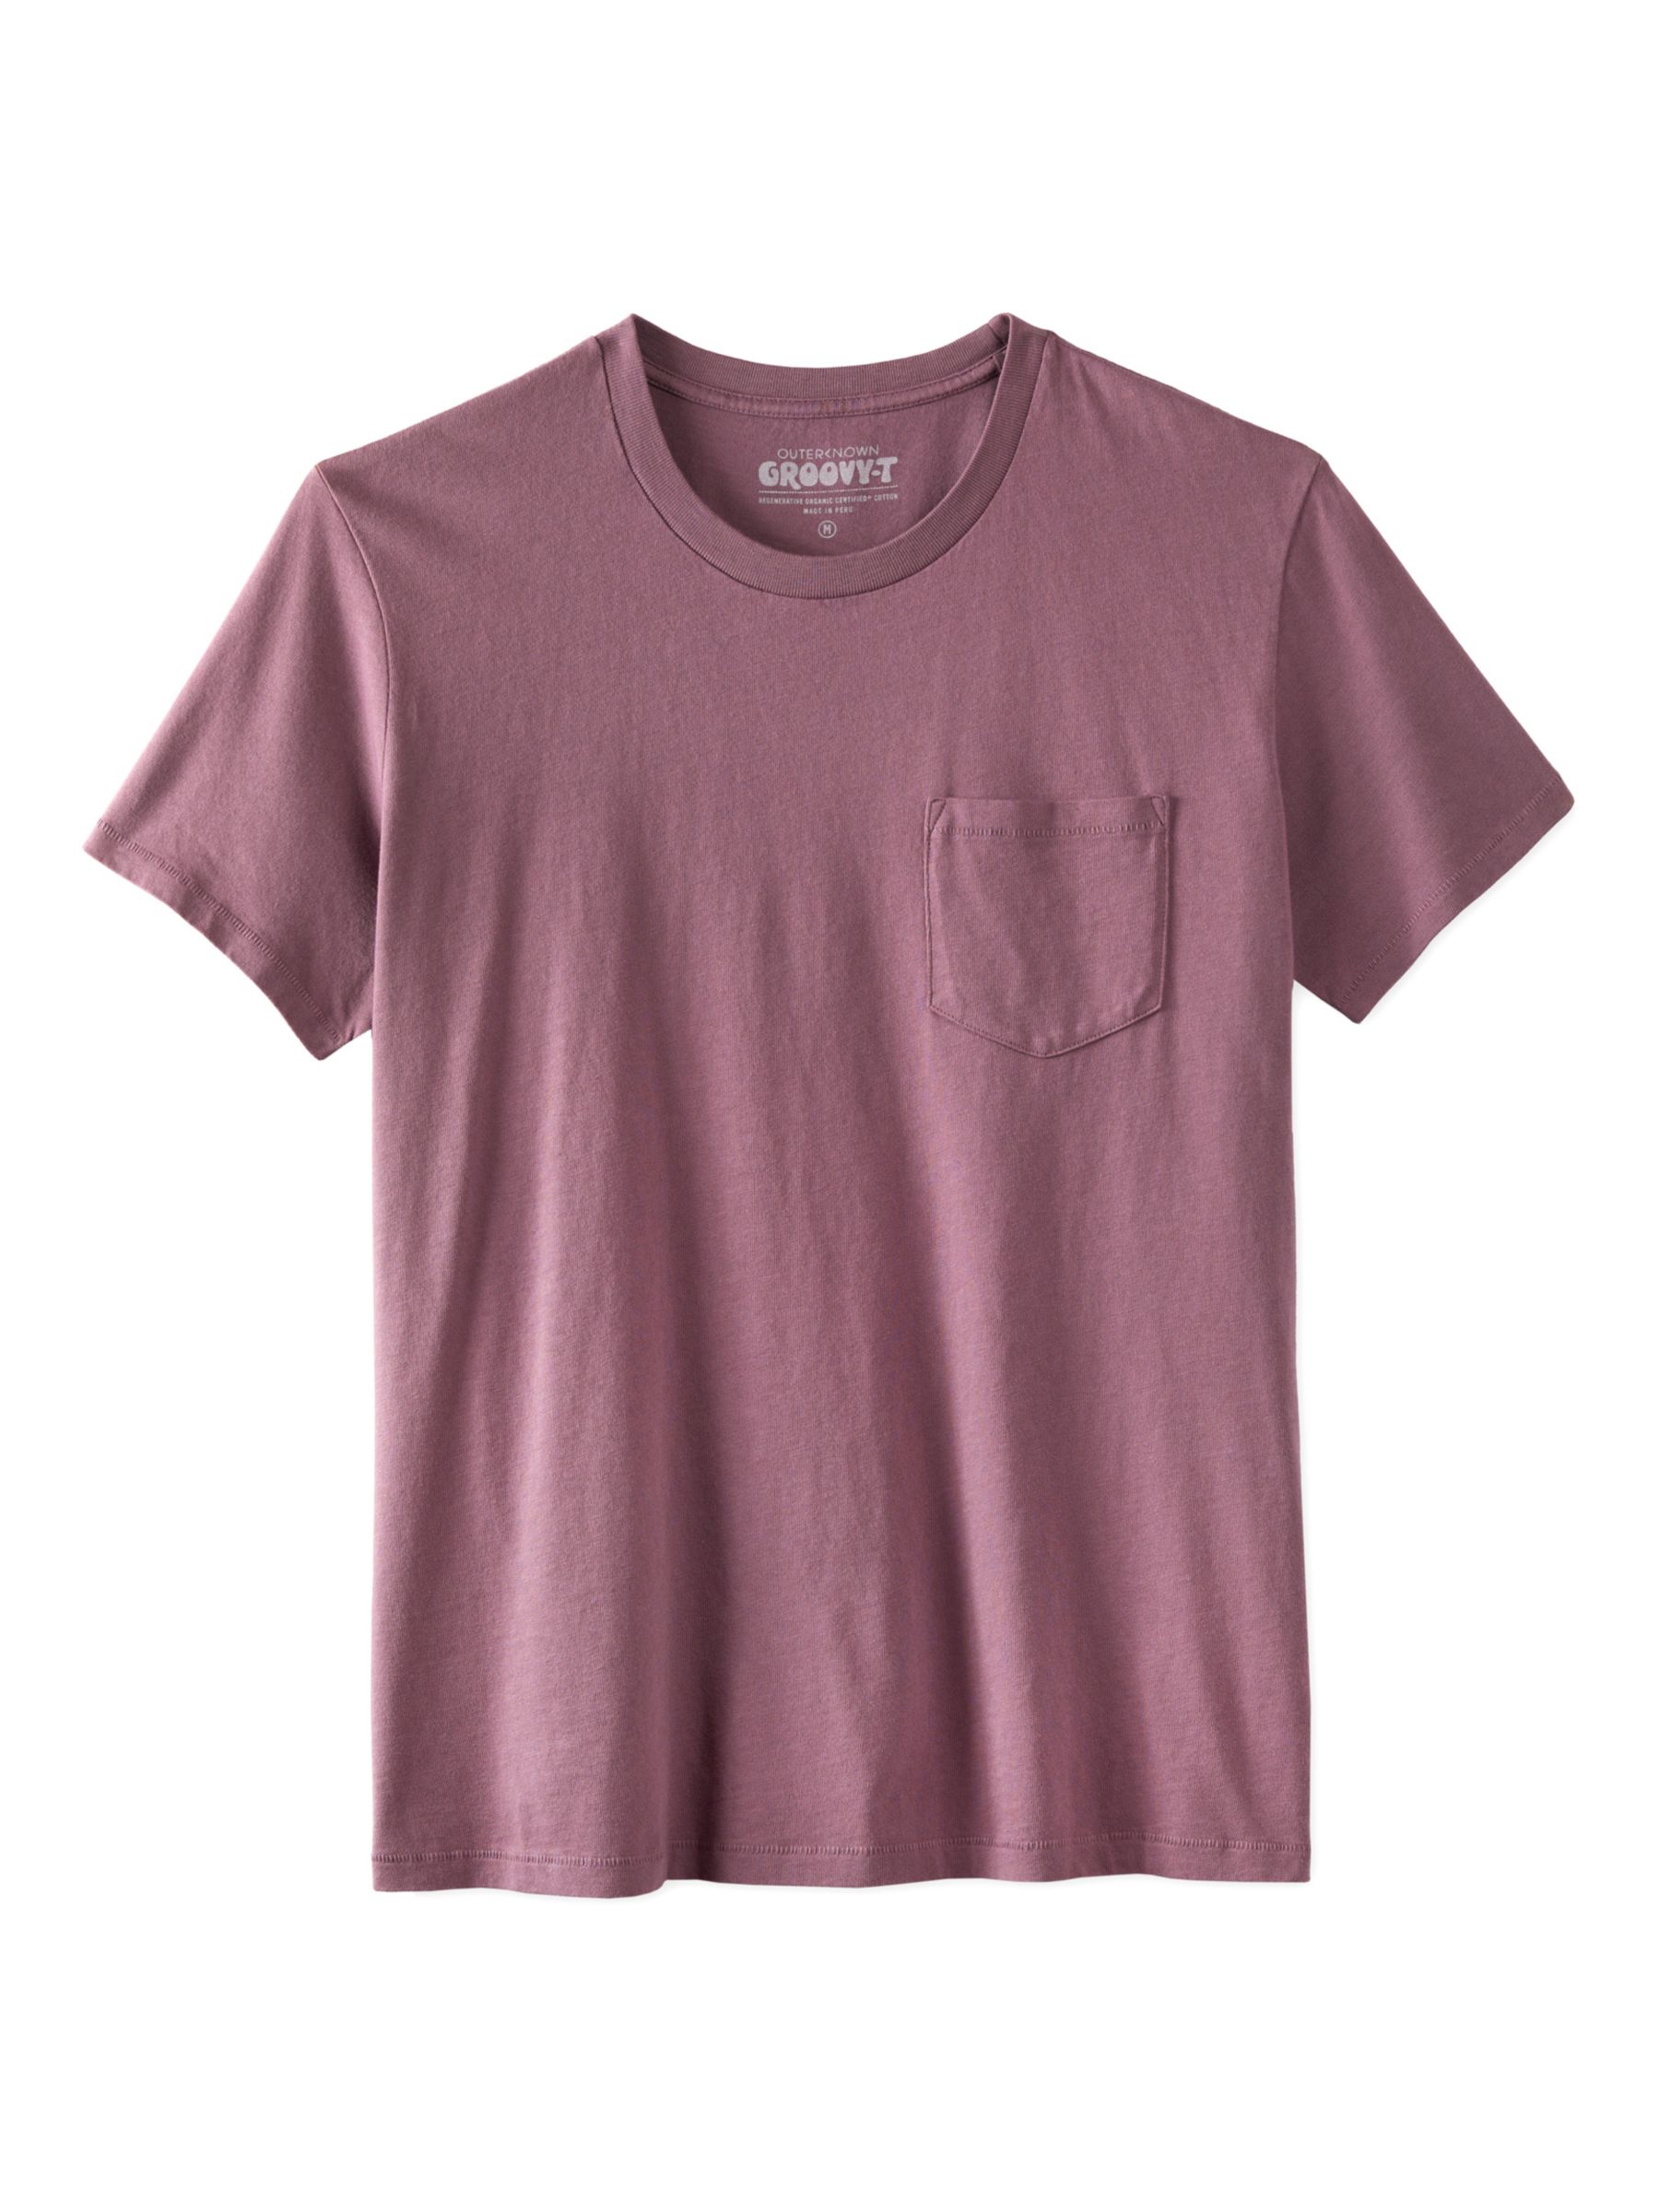 Outerknown Groovy Pocket Short Sleeve T-Shirt